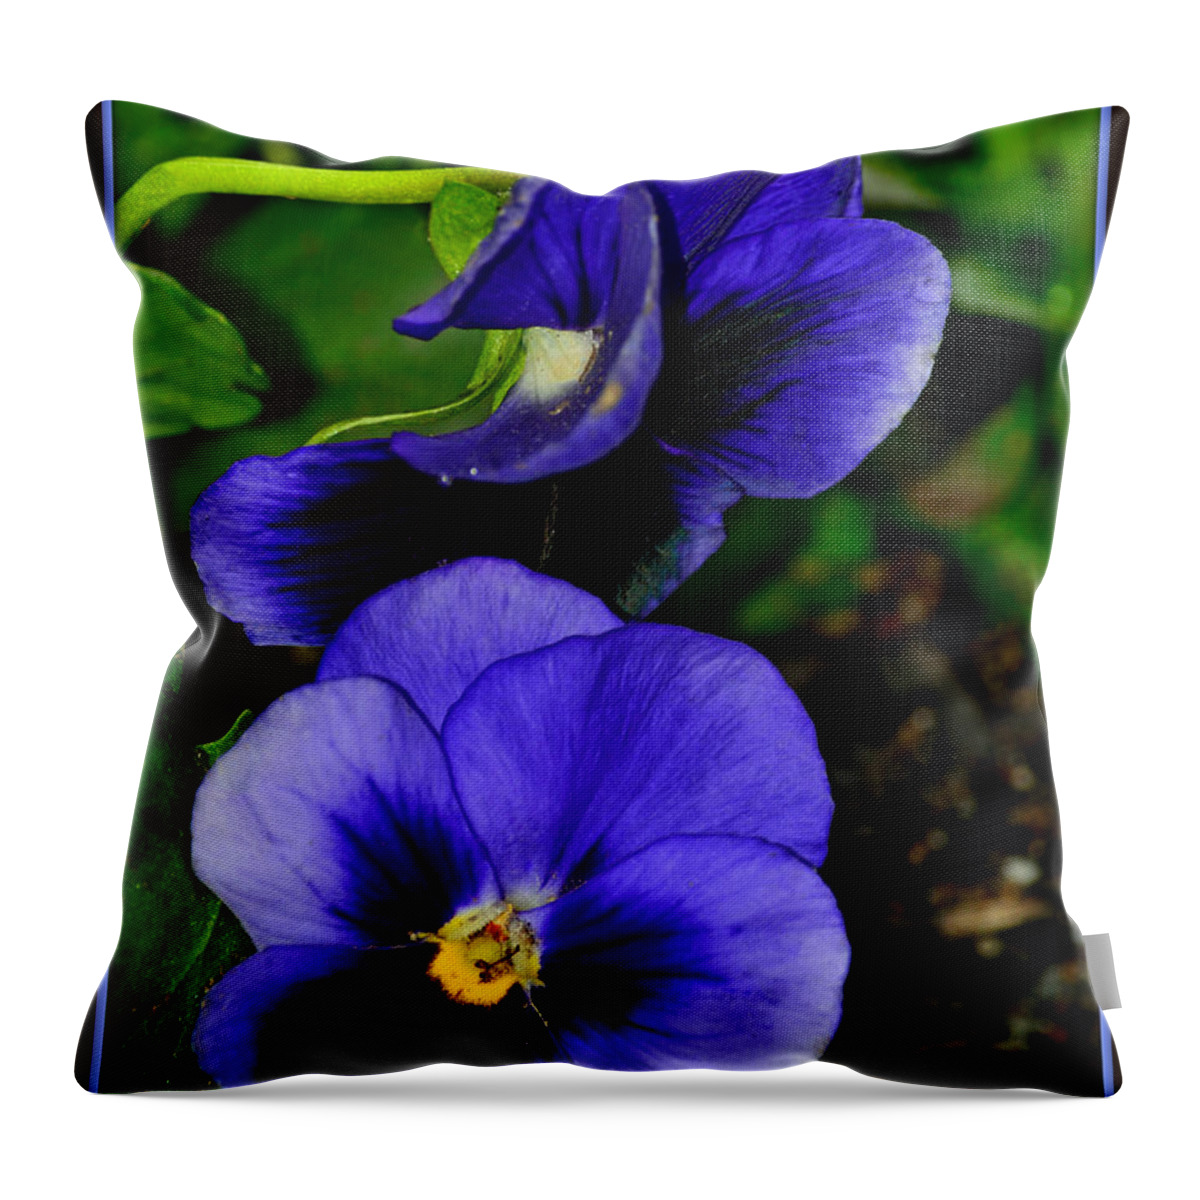 Pansies Throw Pillow featuring the photograph Purple Pansies by Constance Lowery